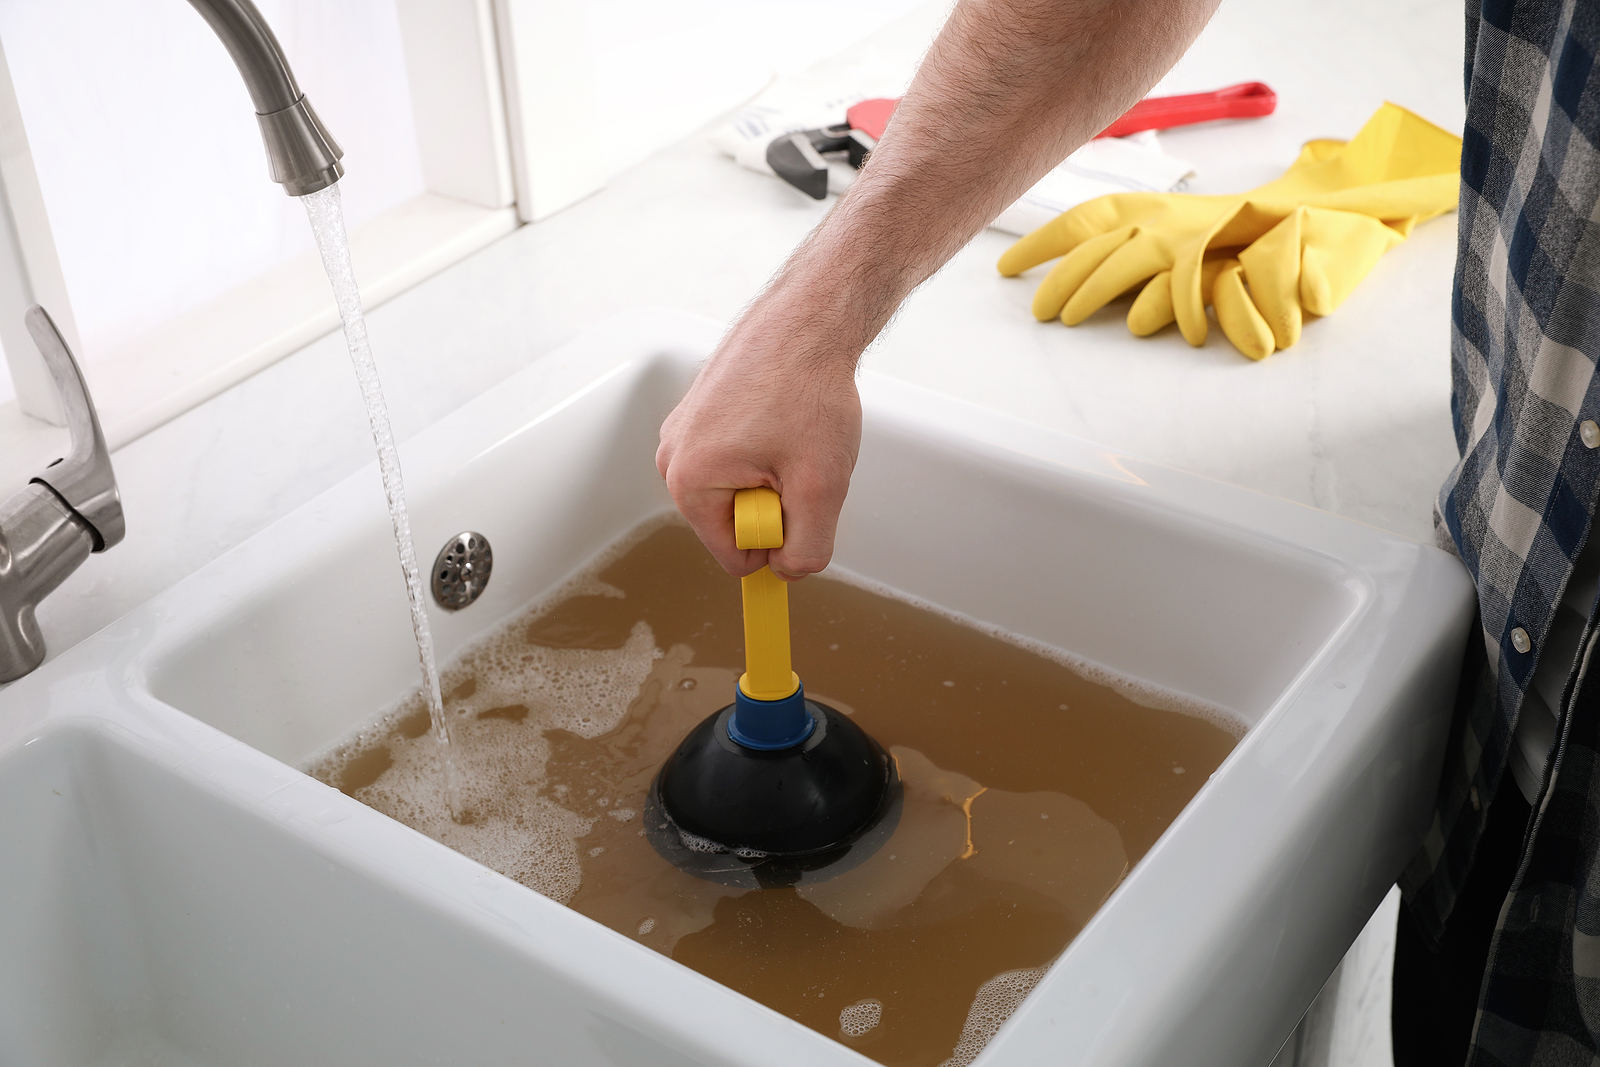 Plumber's drain cleaner tool. Rubber suction cup with wooden